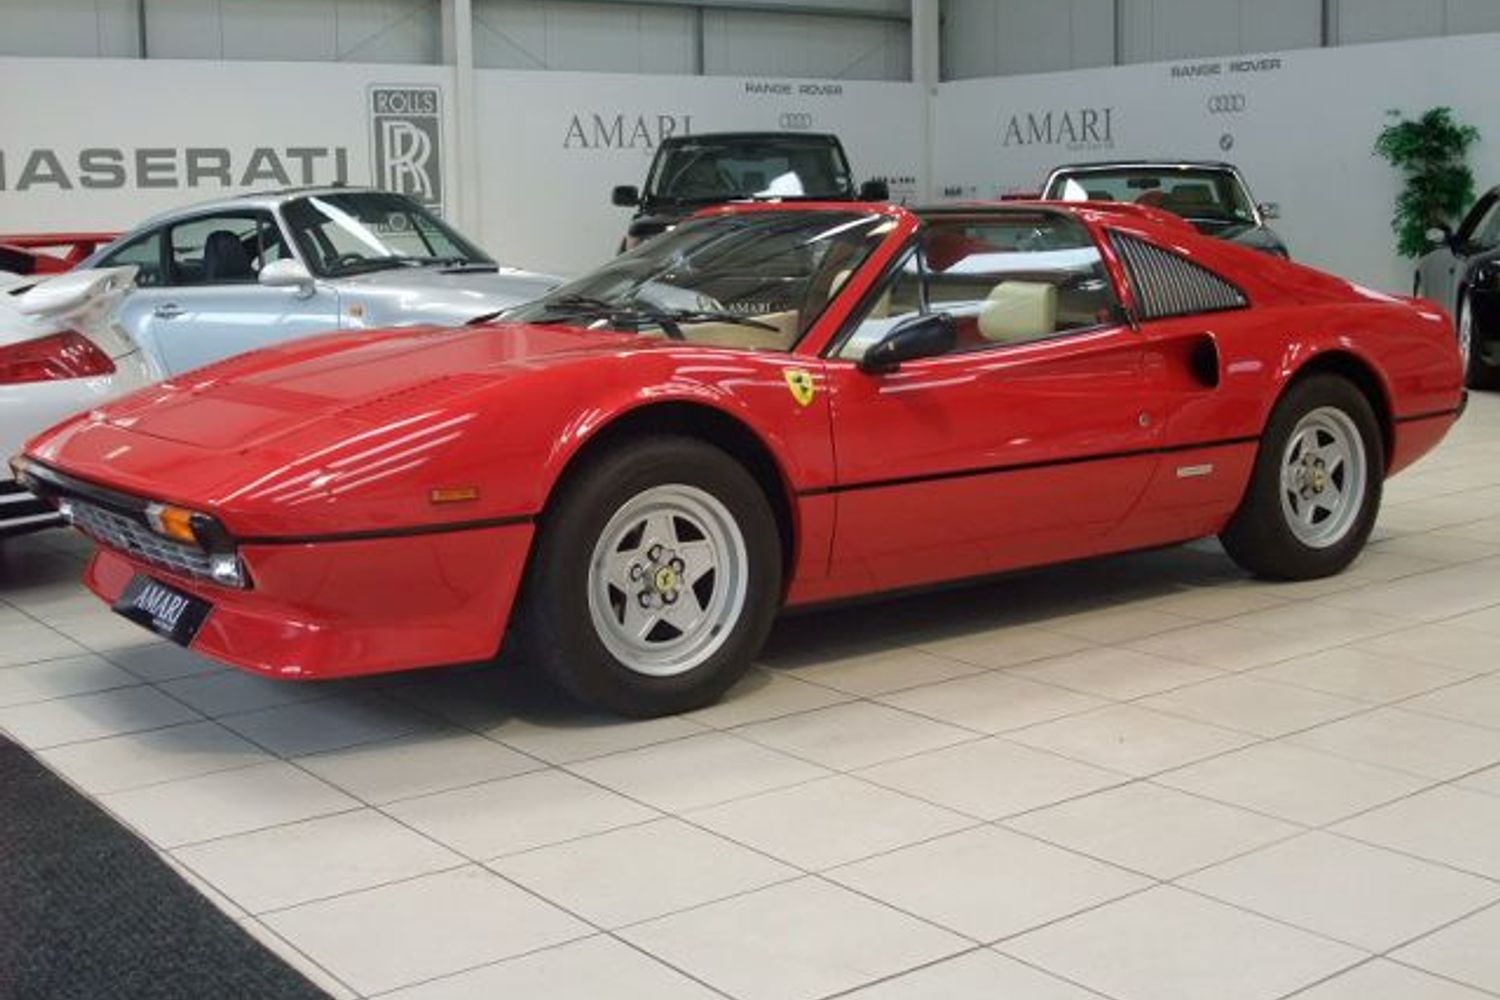 FERRARI 308 GTS QV "Classic Investment" Choice of two 308�s